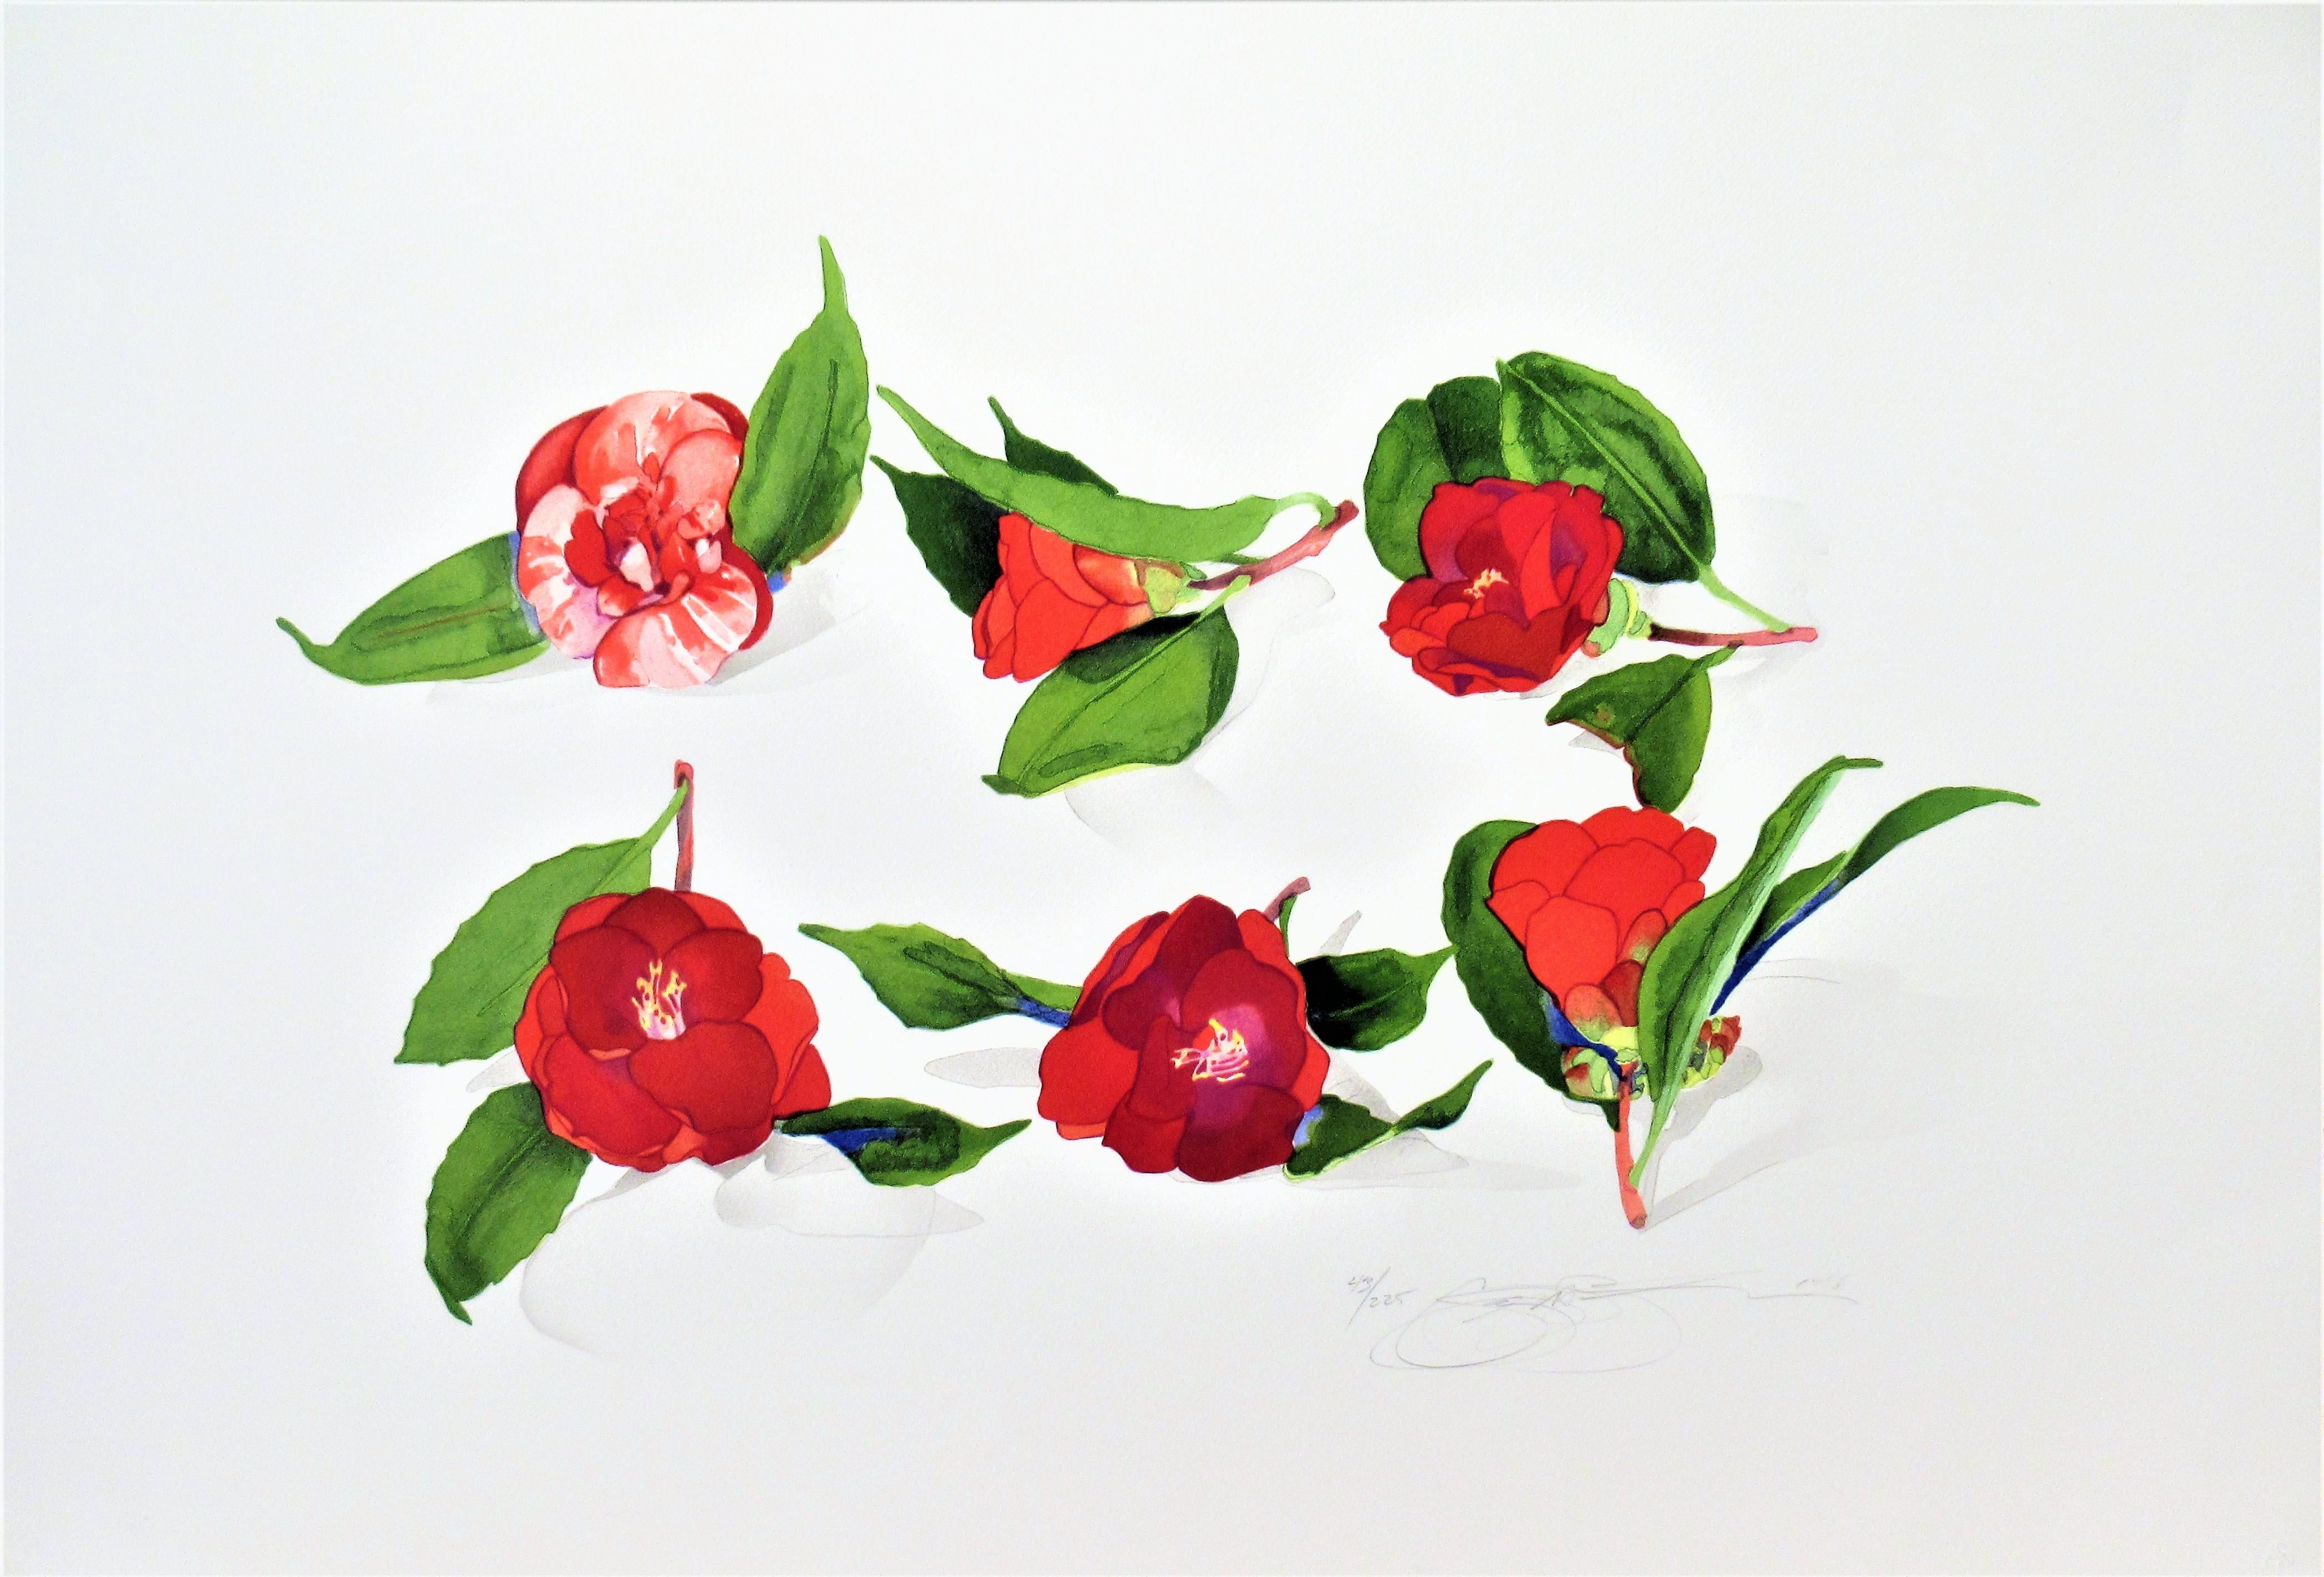 6 Camellias After An Unknown Japanese Artist